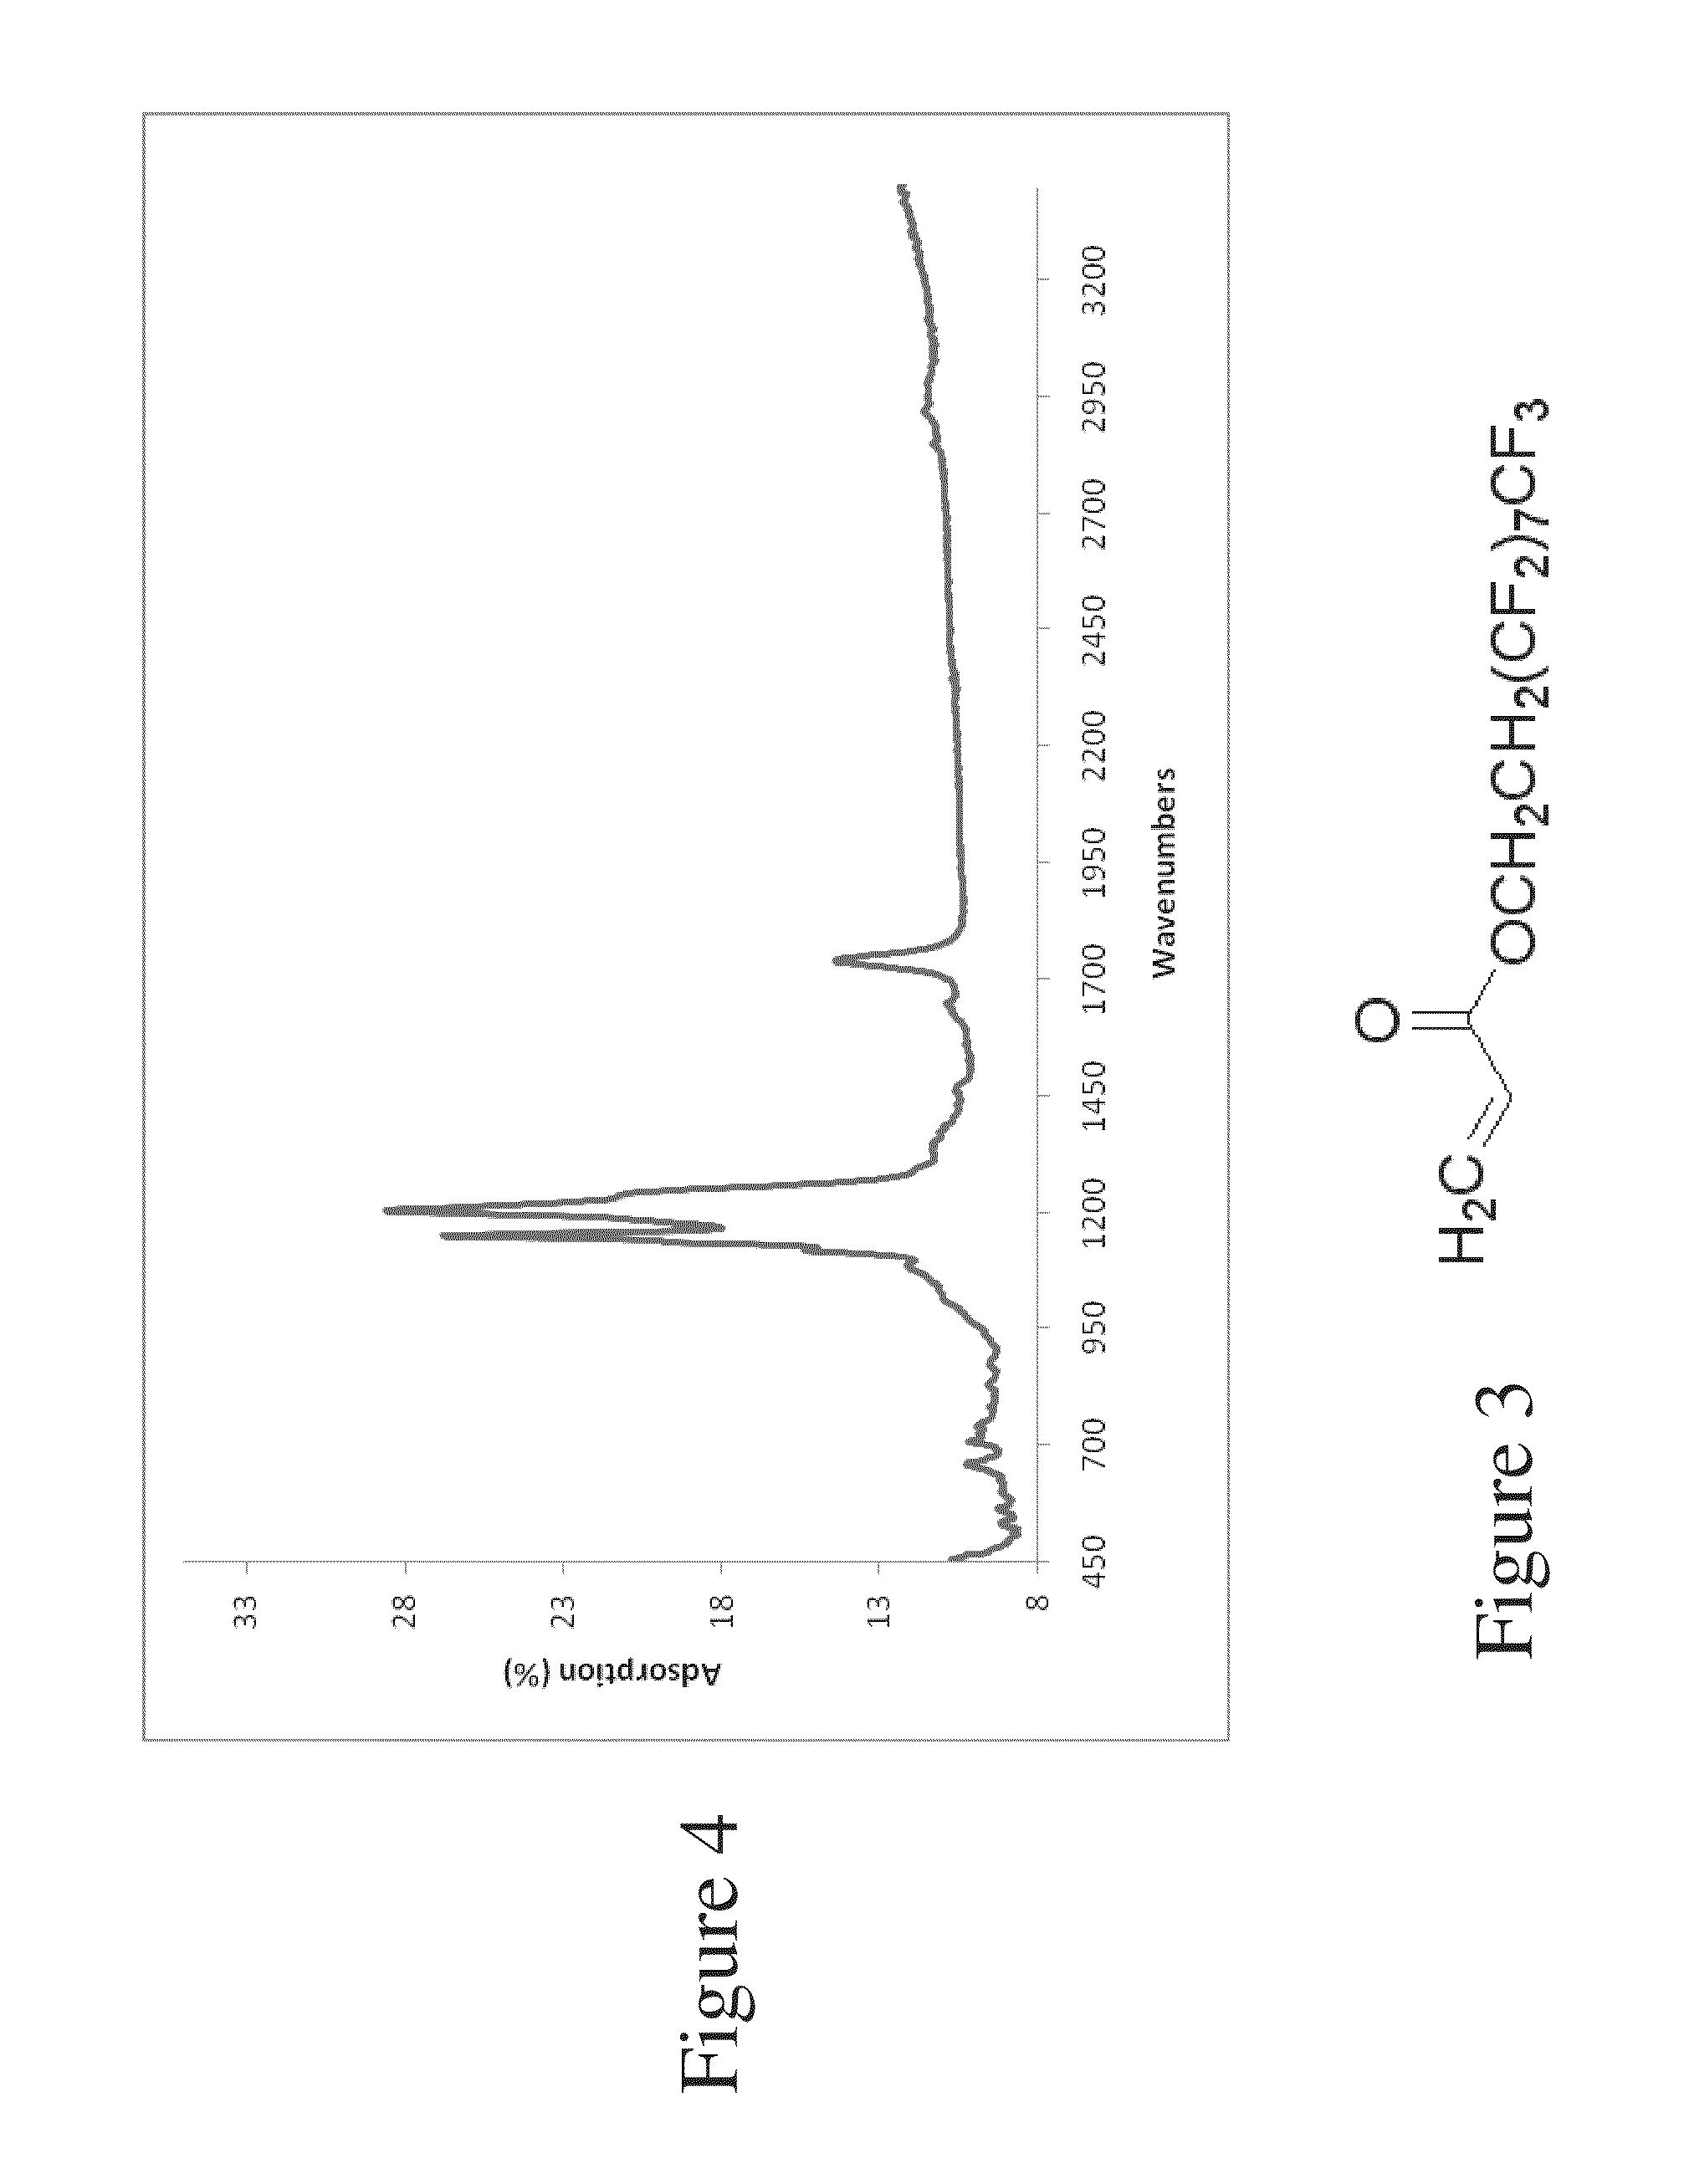 Apparatus and method for deposition of functional coatings